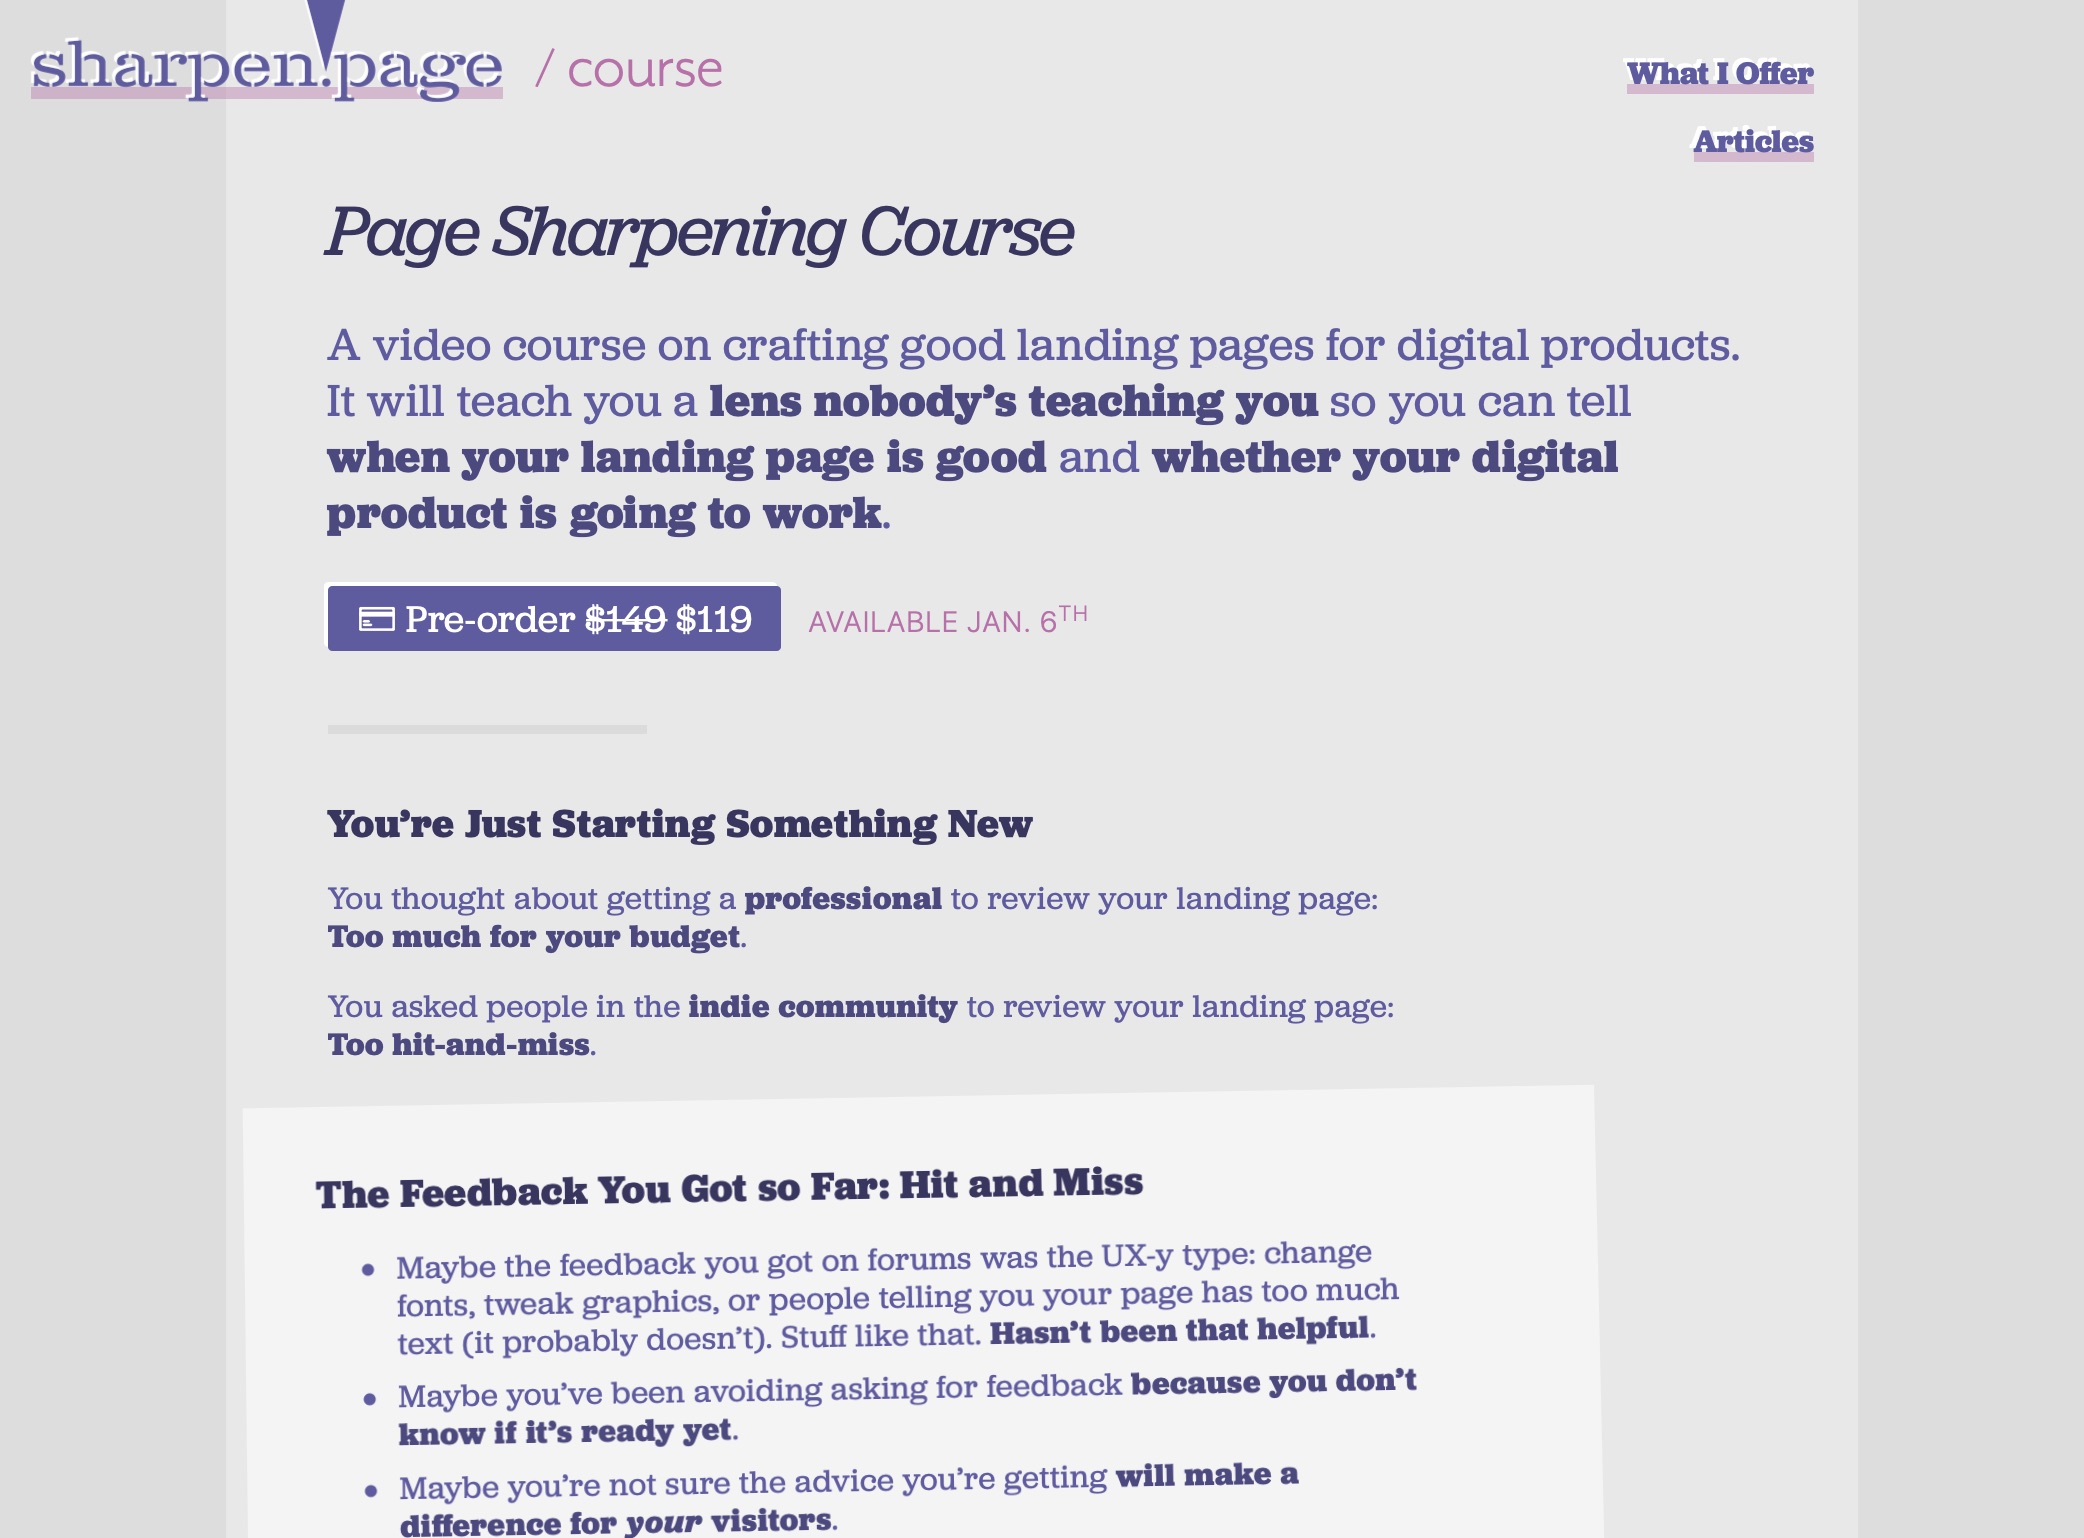 Not an Instant Review, a Page Sharpening Course!